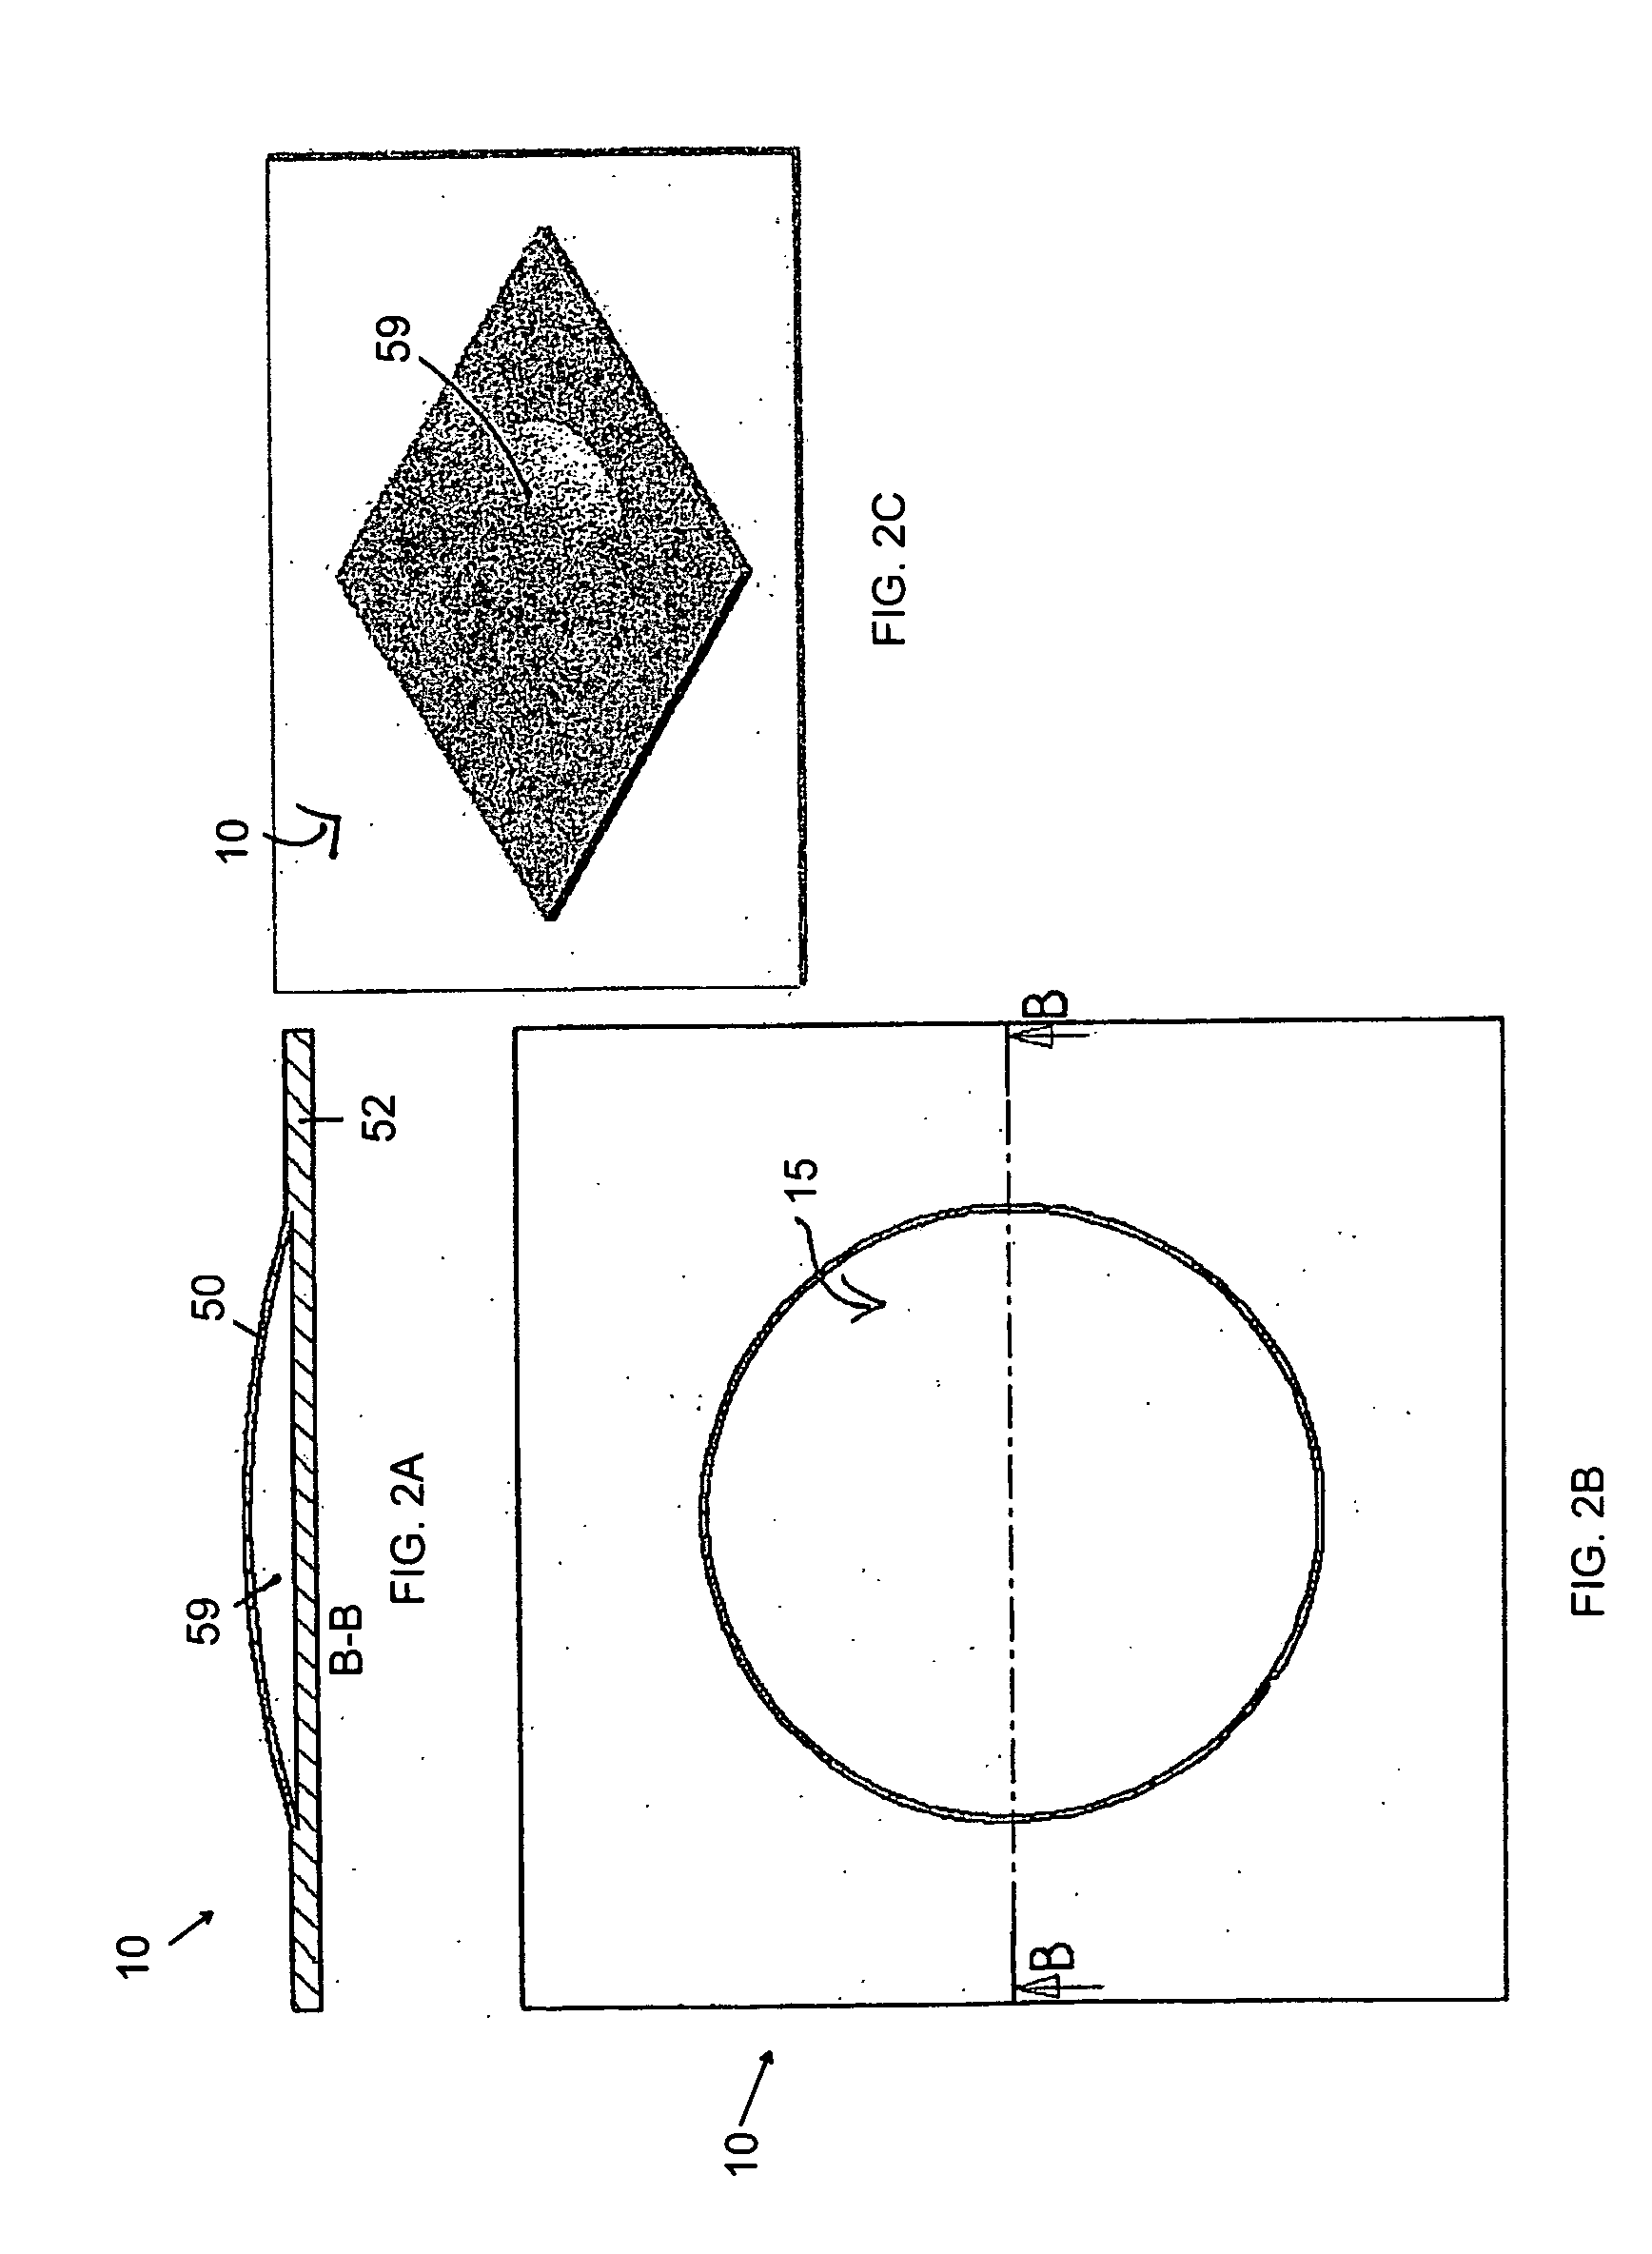 Microfluidic Pump and Valve Structures and Fabrication Methods